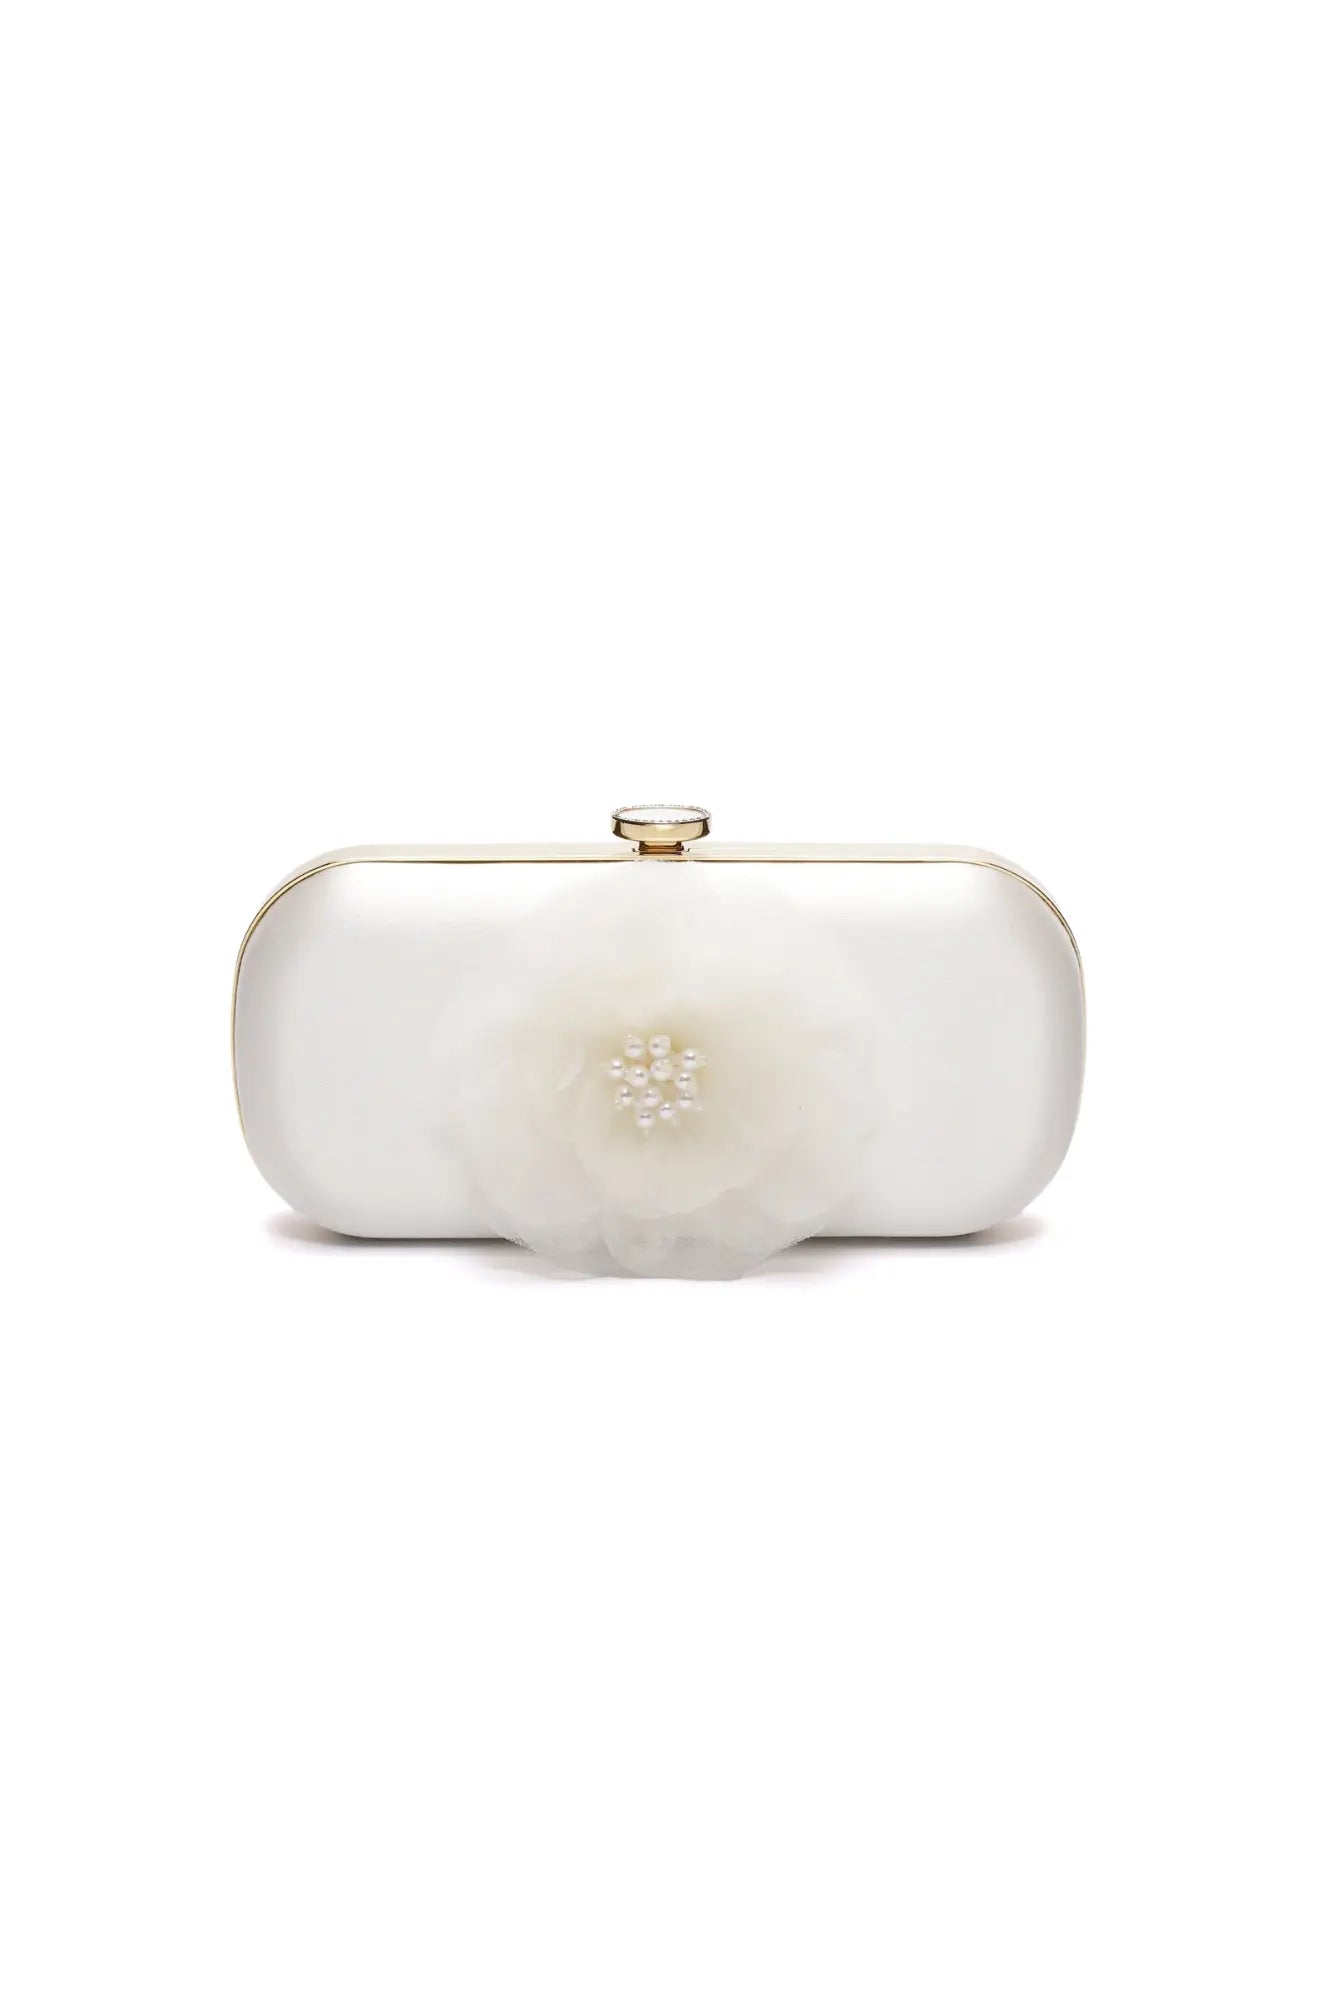 A Bella Fiori Clutch Ivory clutch purse with a floral embellishment and gold trim from The Bella Rosa Collection.